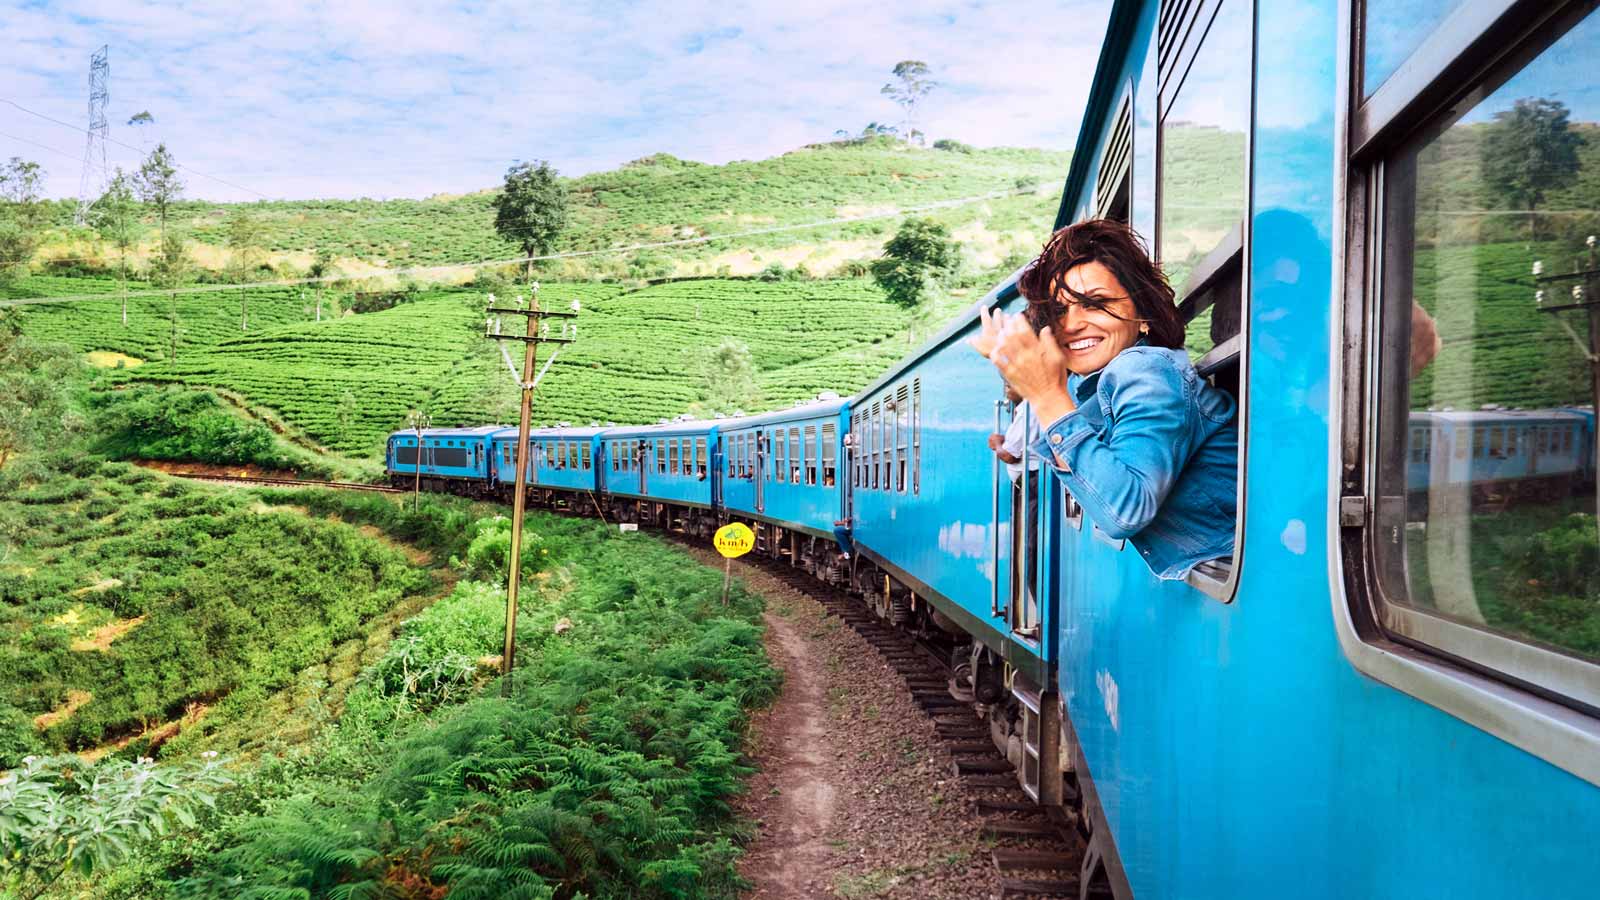 <p>Sri Lanka Railways introduced its tourist-friendly luxury, the “<a href="https://www.telegraph.co.uk/travel/destinations/asia/sri-lanka/sri-lanka-has-new-contender-worlds-scenic-rail-journey/" rel="nofollow noopener">Ella Odyssey</a>,” last year to complement its Main Line, built during British rule to connect the capital city Colombo with Badulla to the east.</p><p>During this seven-hour journey, passengers are wowed by the beauty of tea plantations, lush tropical greenery, rolling hills, and small villages. However, it is recommended that travelers refrain from booking first-class tickets because their experience will be limited by not mingling with the locals or having open windows, allowing a fresh breeze.</p>